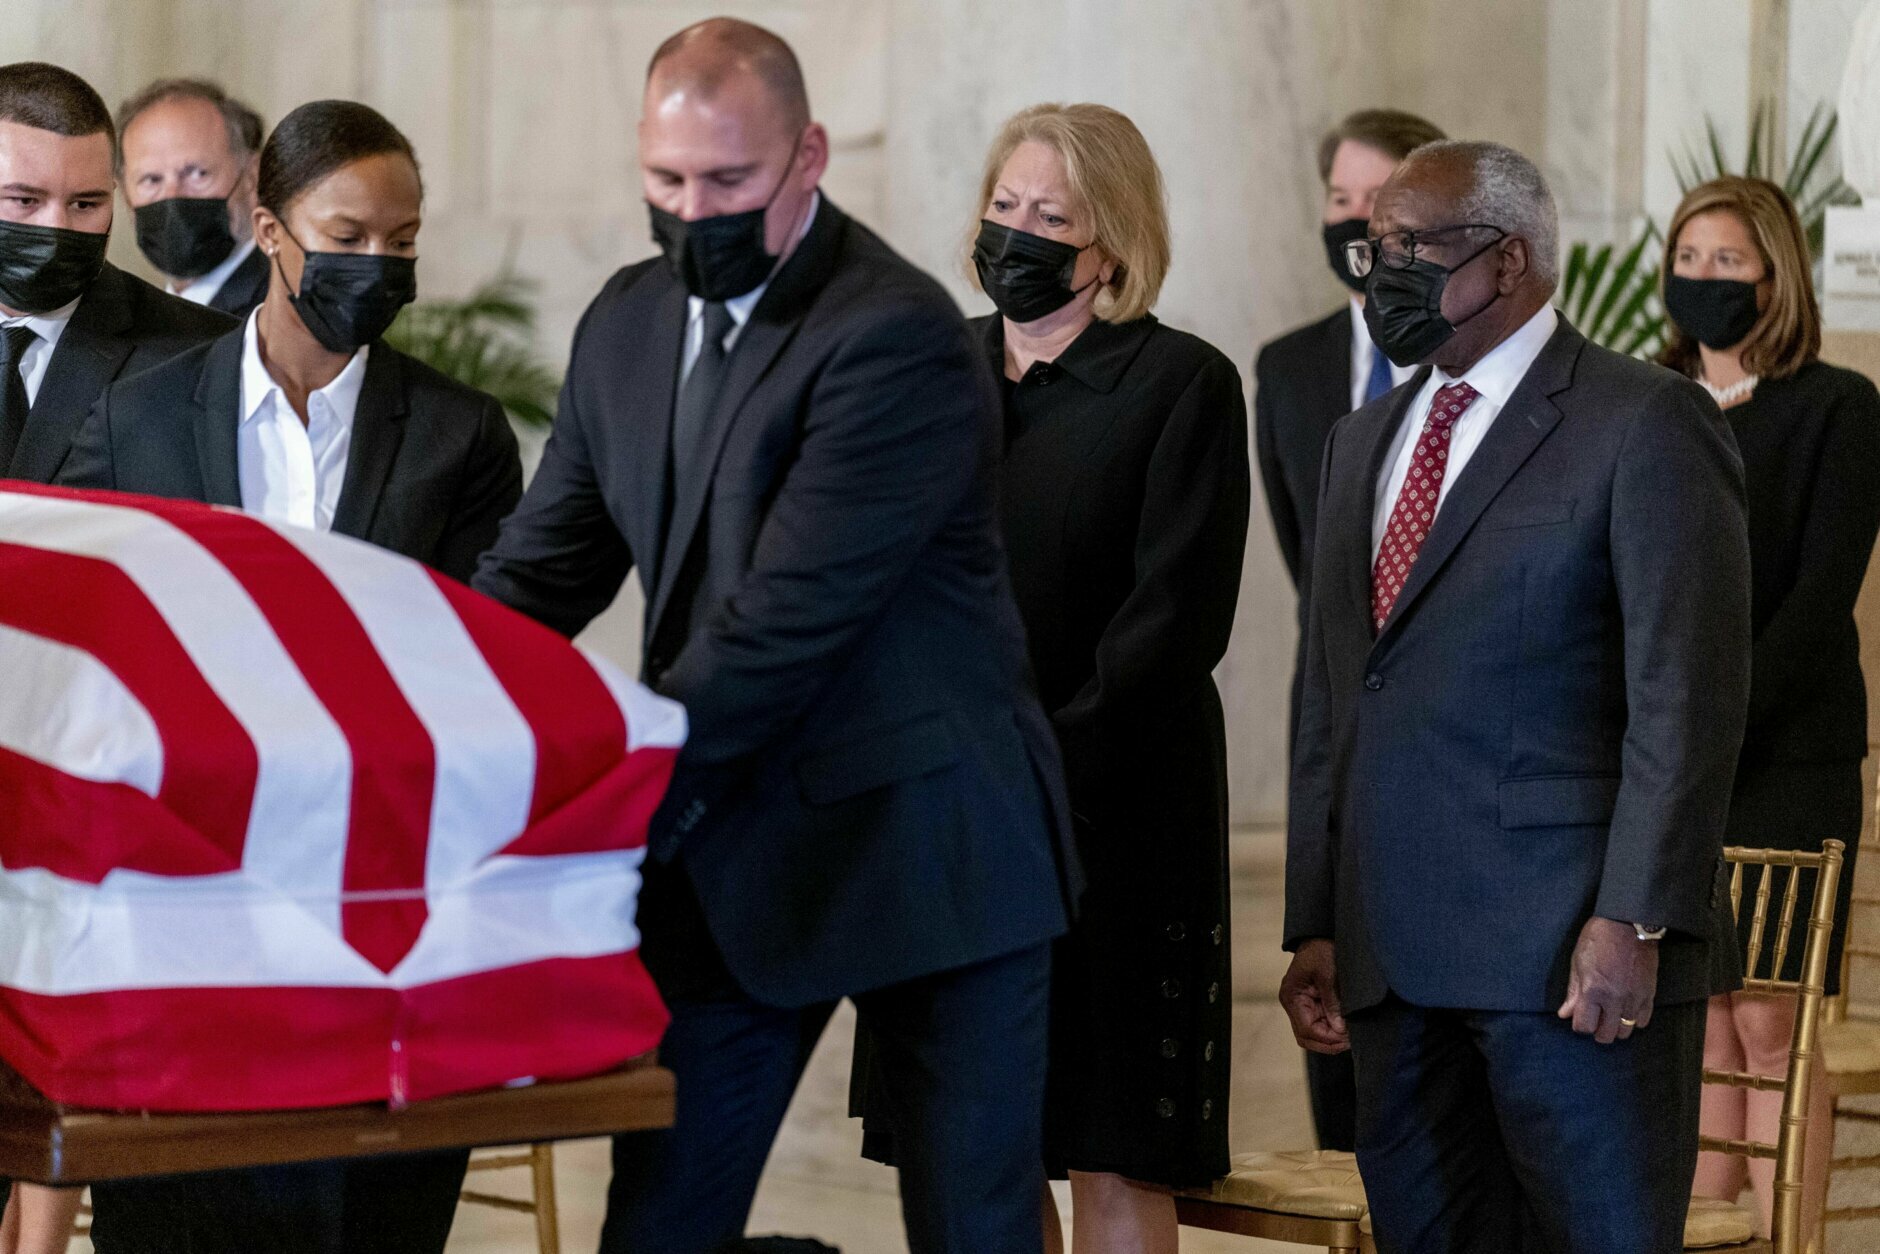 Justice Clarence Thomas, right, and his wife Virginia Thomas, center, watch as the flag-draped casket of Justice Ruth Bader Ginsburg arrives at the Supreme Court in Washington, Wednesday, Sept. 23, 2020. Ginsburg, 87, died of cancer on Sept. 18. (AP Photo/Andrew Harnik, Pool)